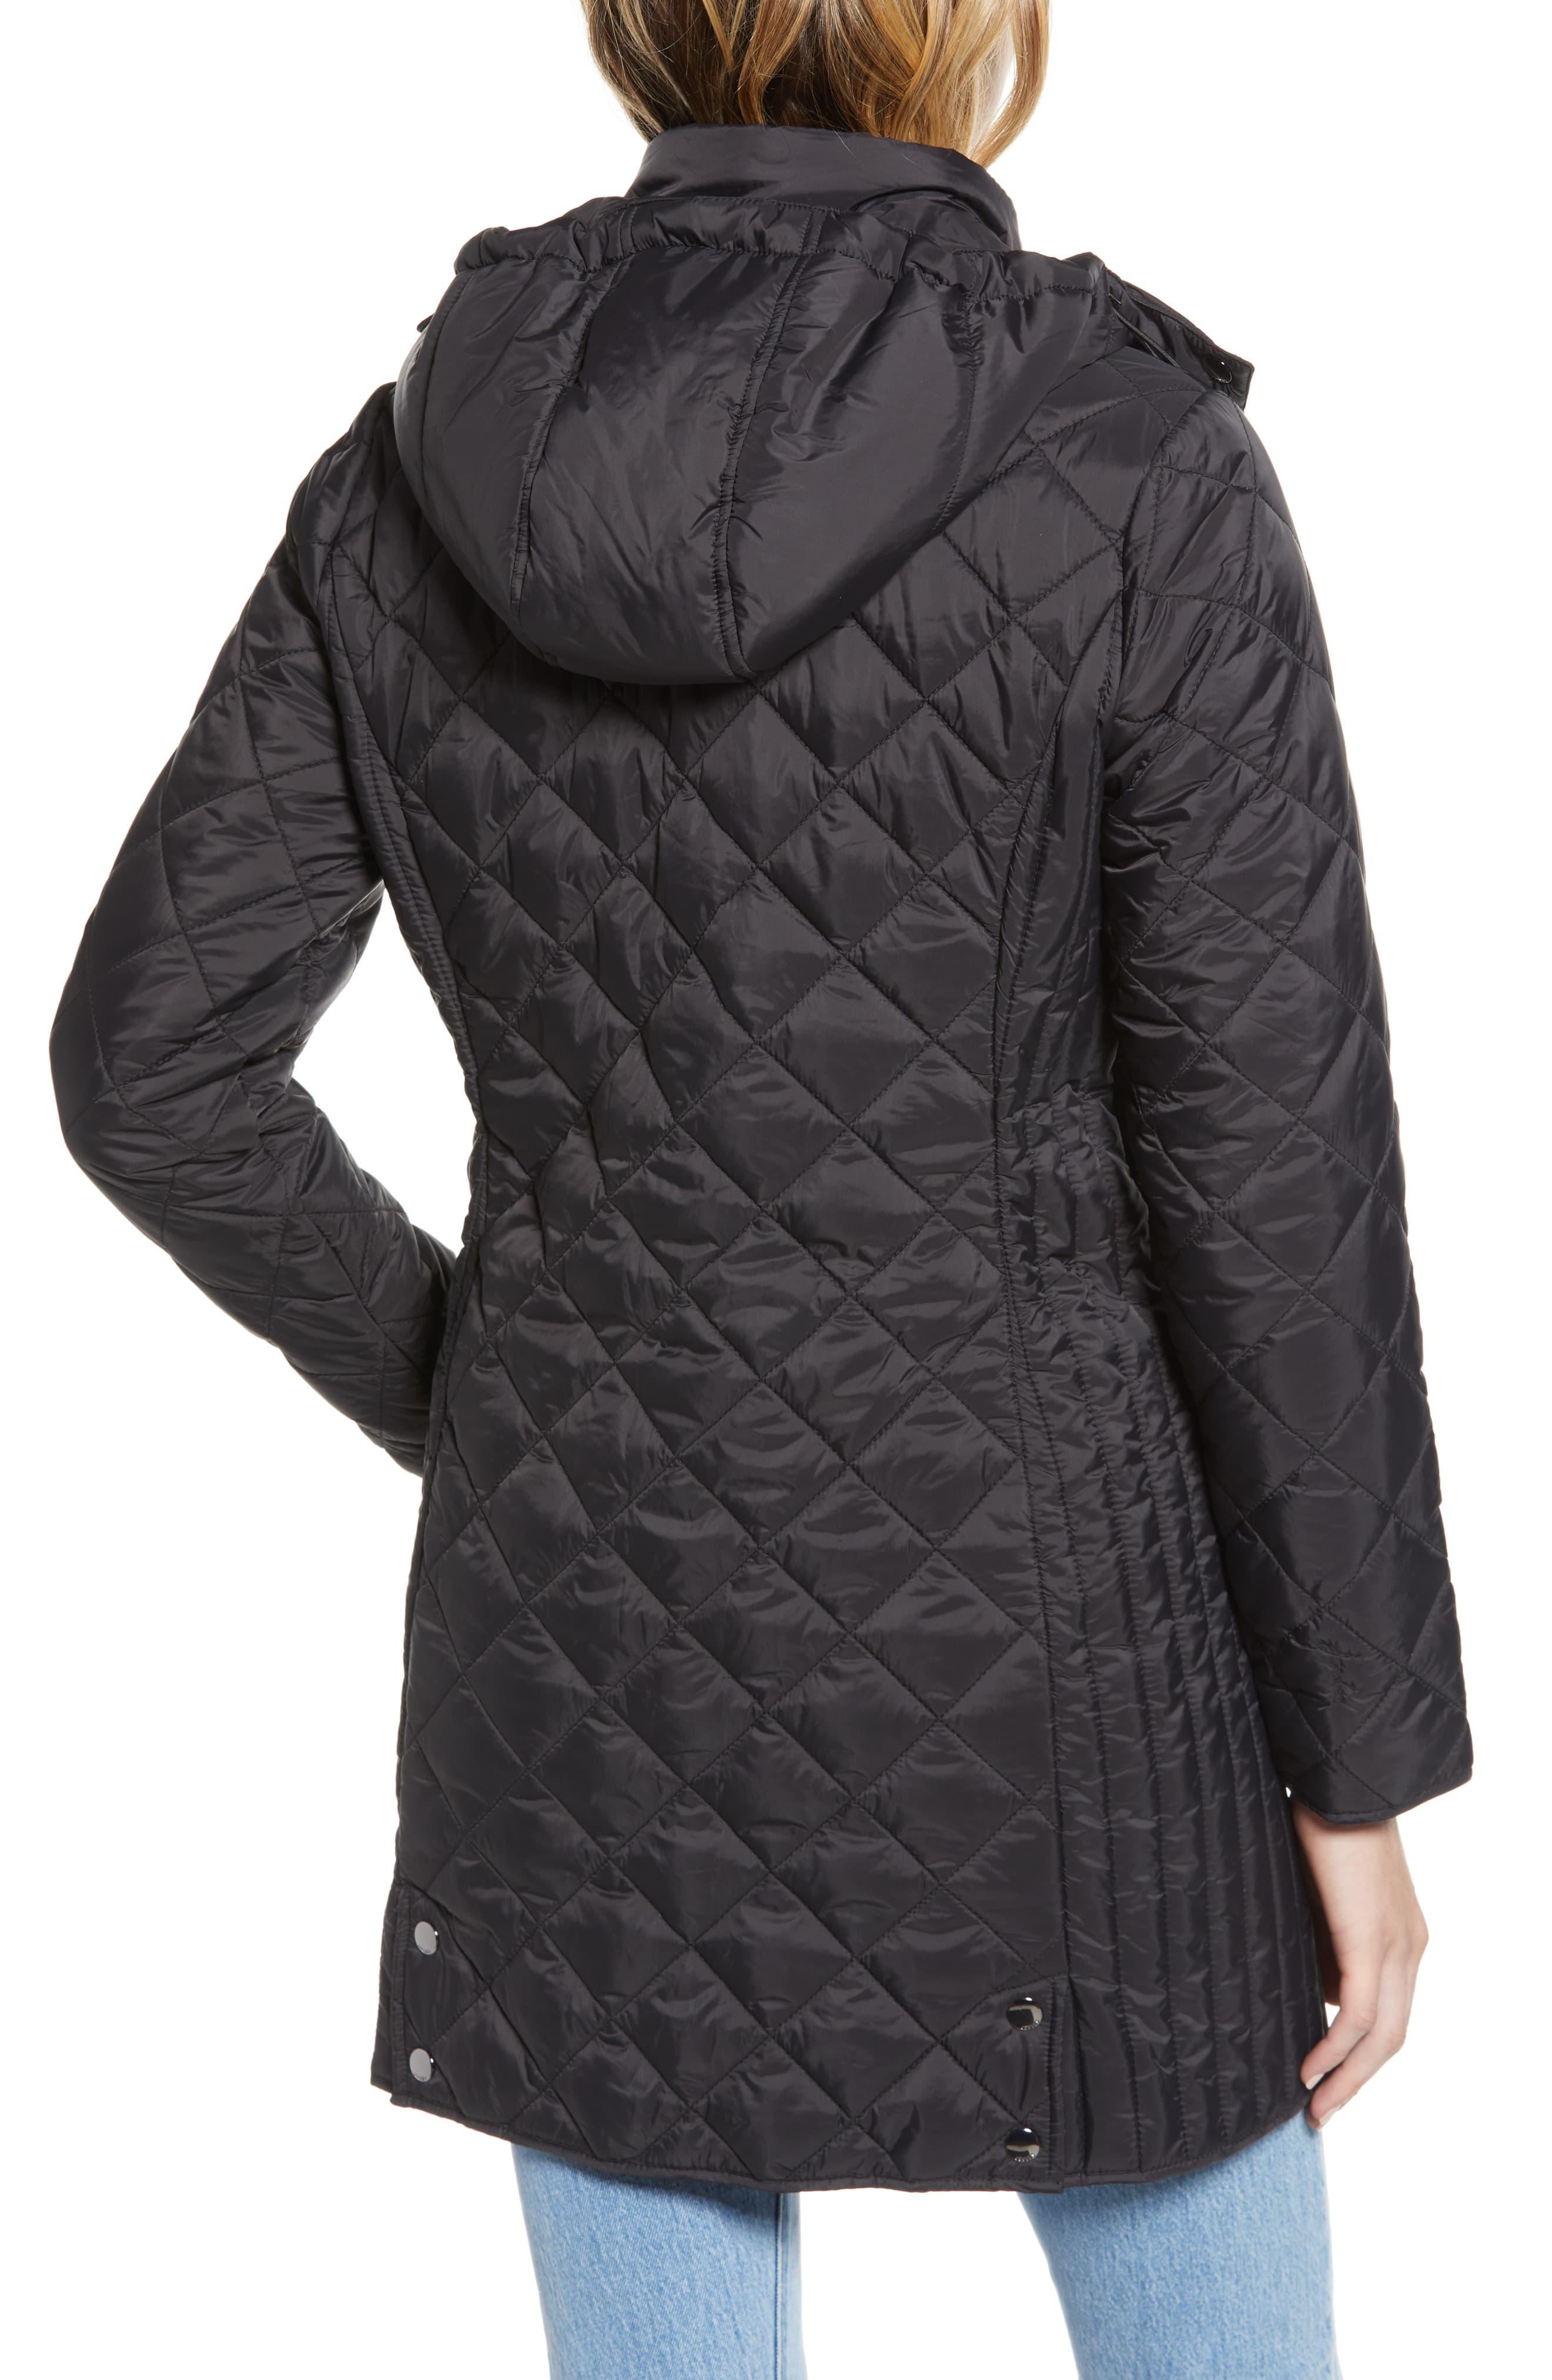 Joules Chatham Longline Quilted Jacket in Black - Lyst